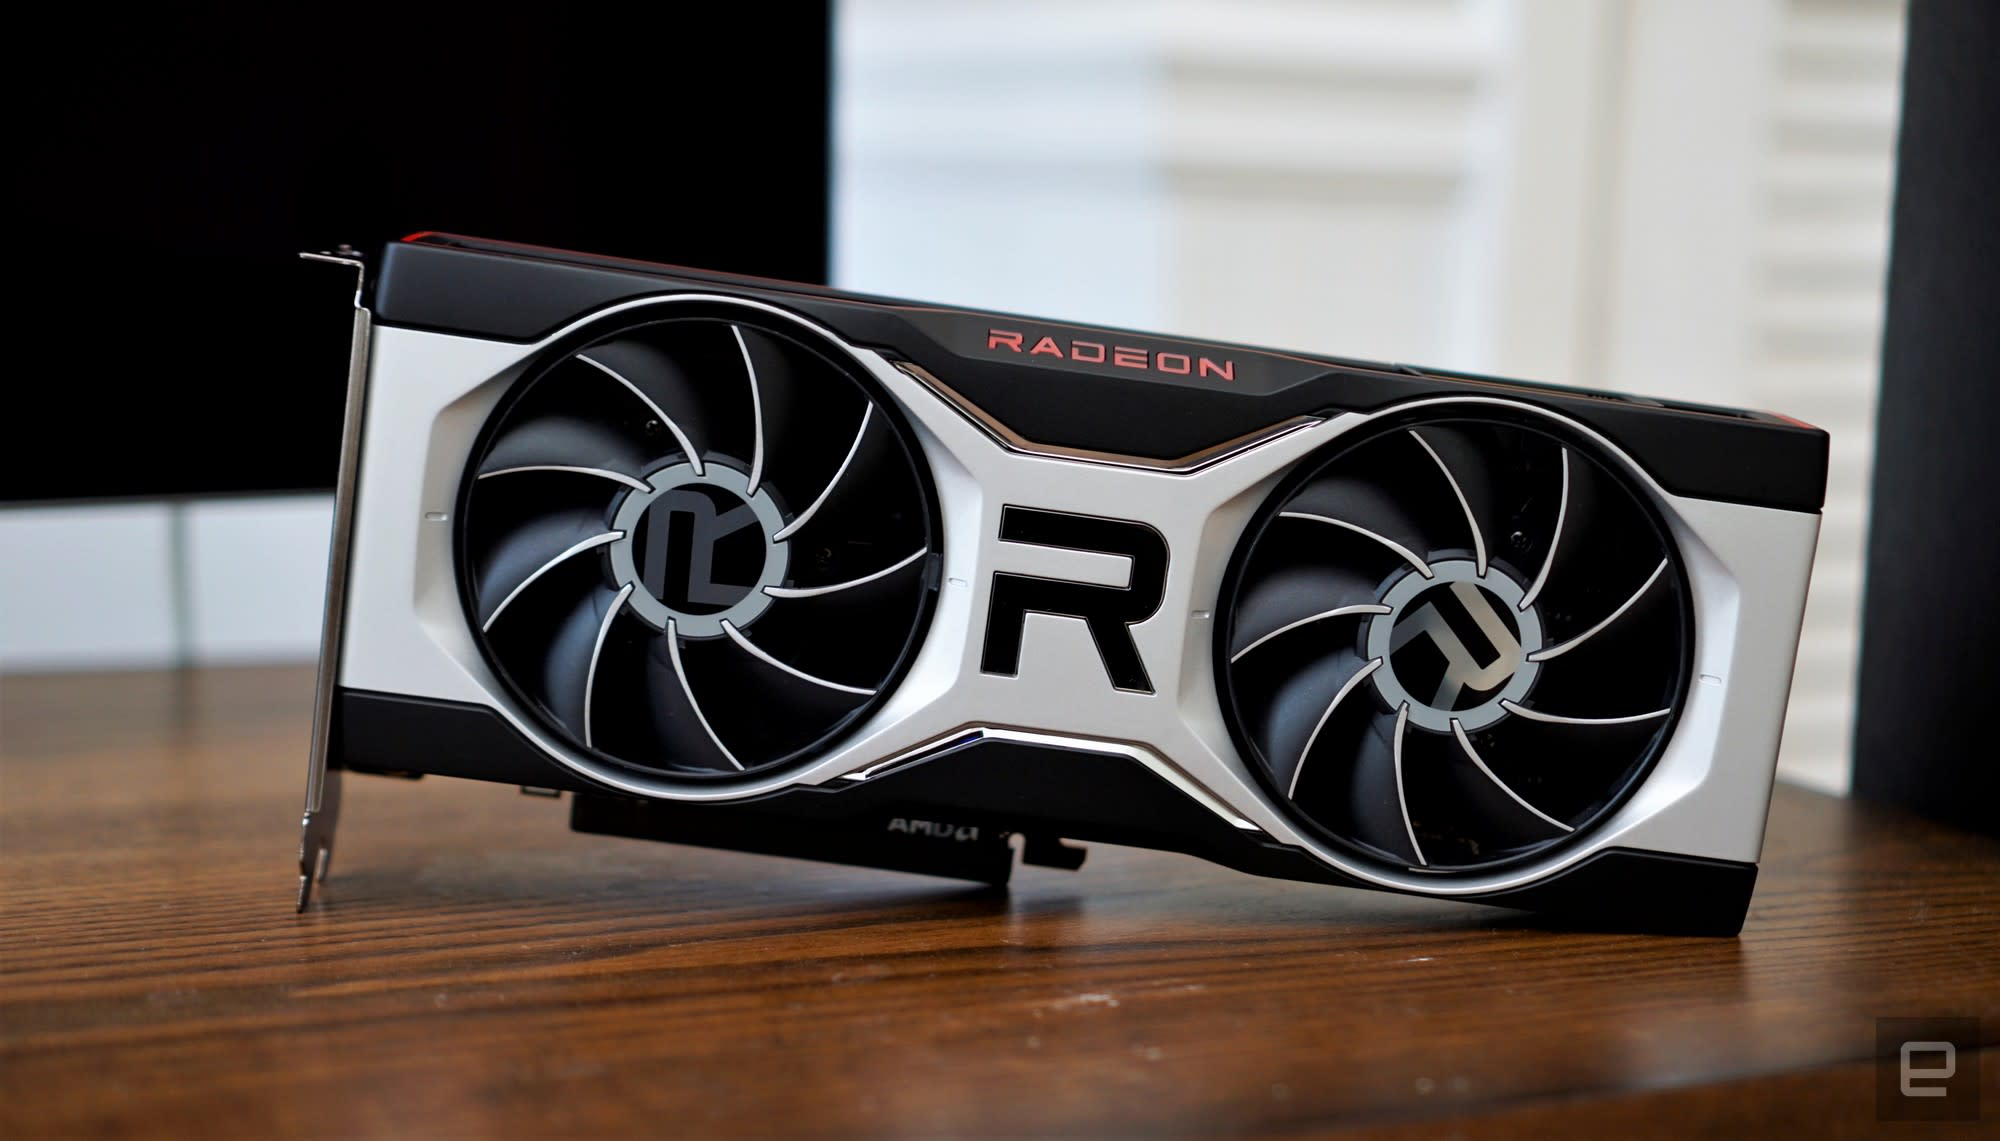 Amd Radeon Rx 6700 Xt Review A Curious Return To Mid Range Gpus Engadget